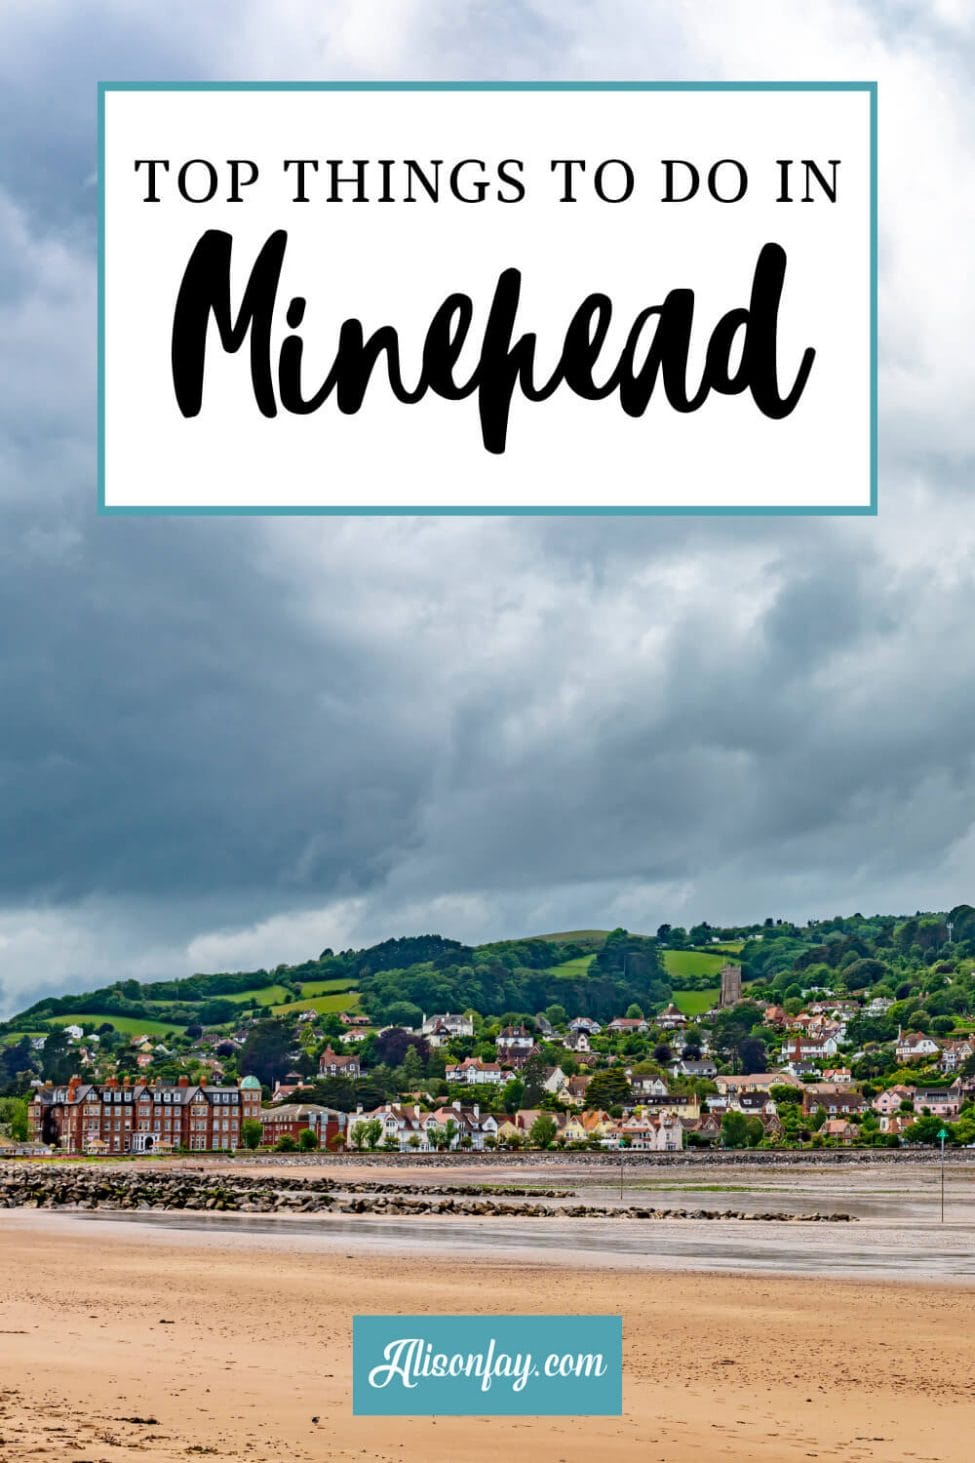 Top things to do in Minehead